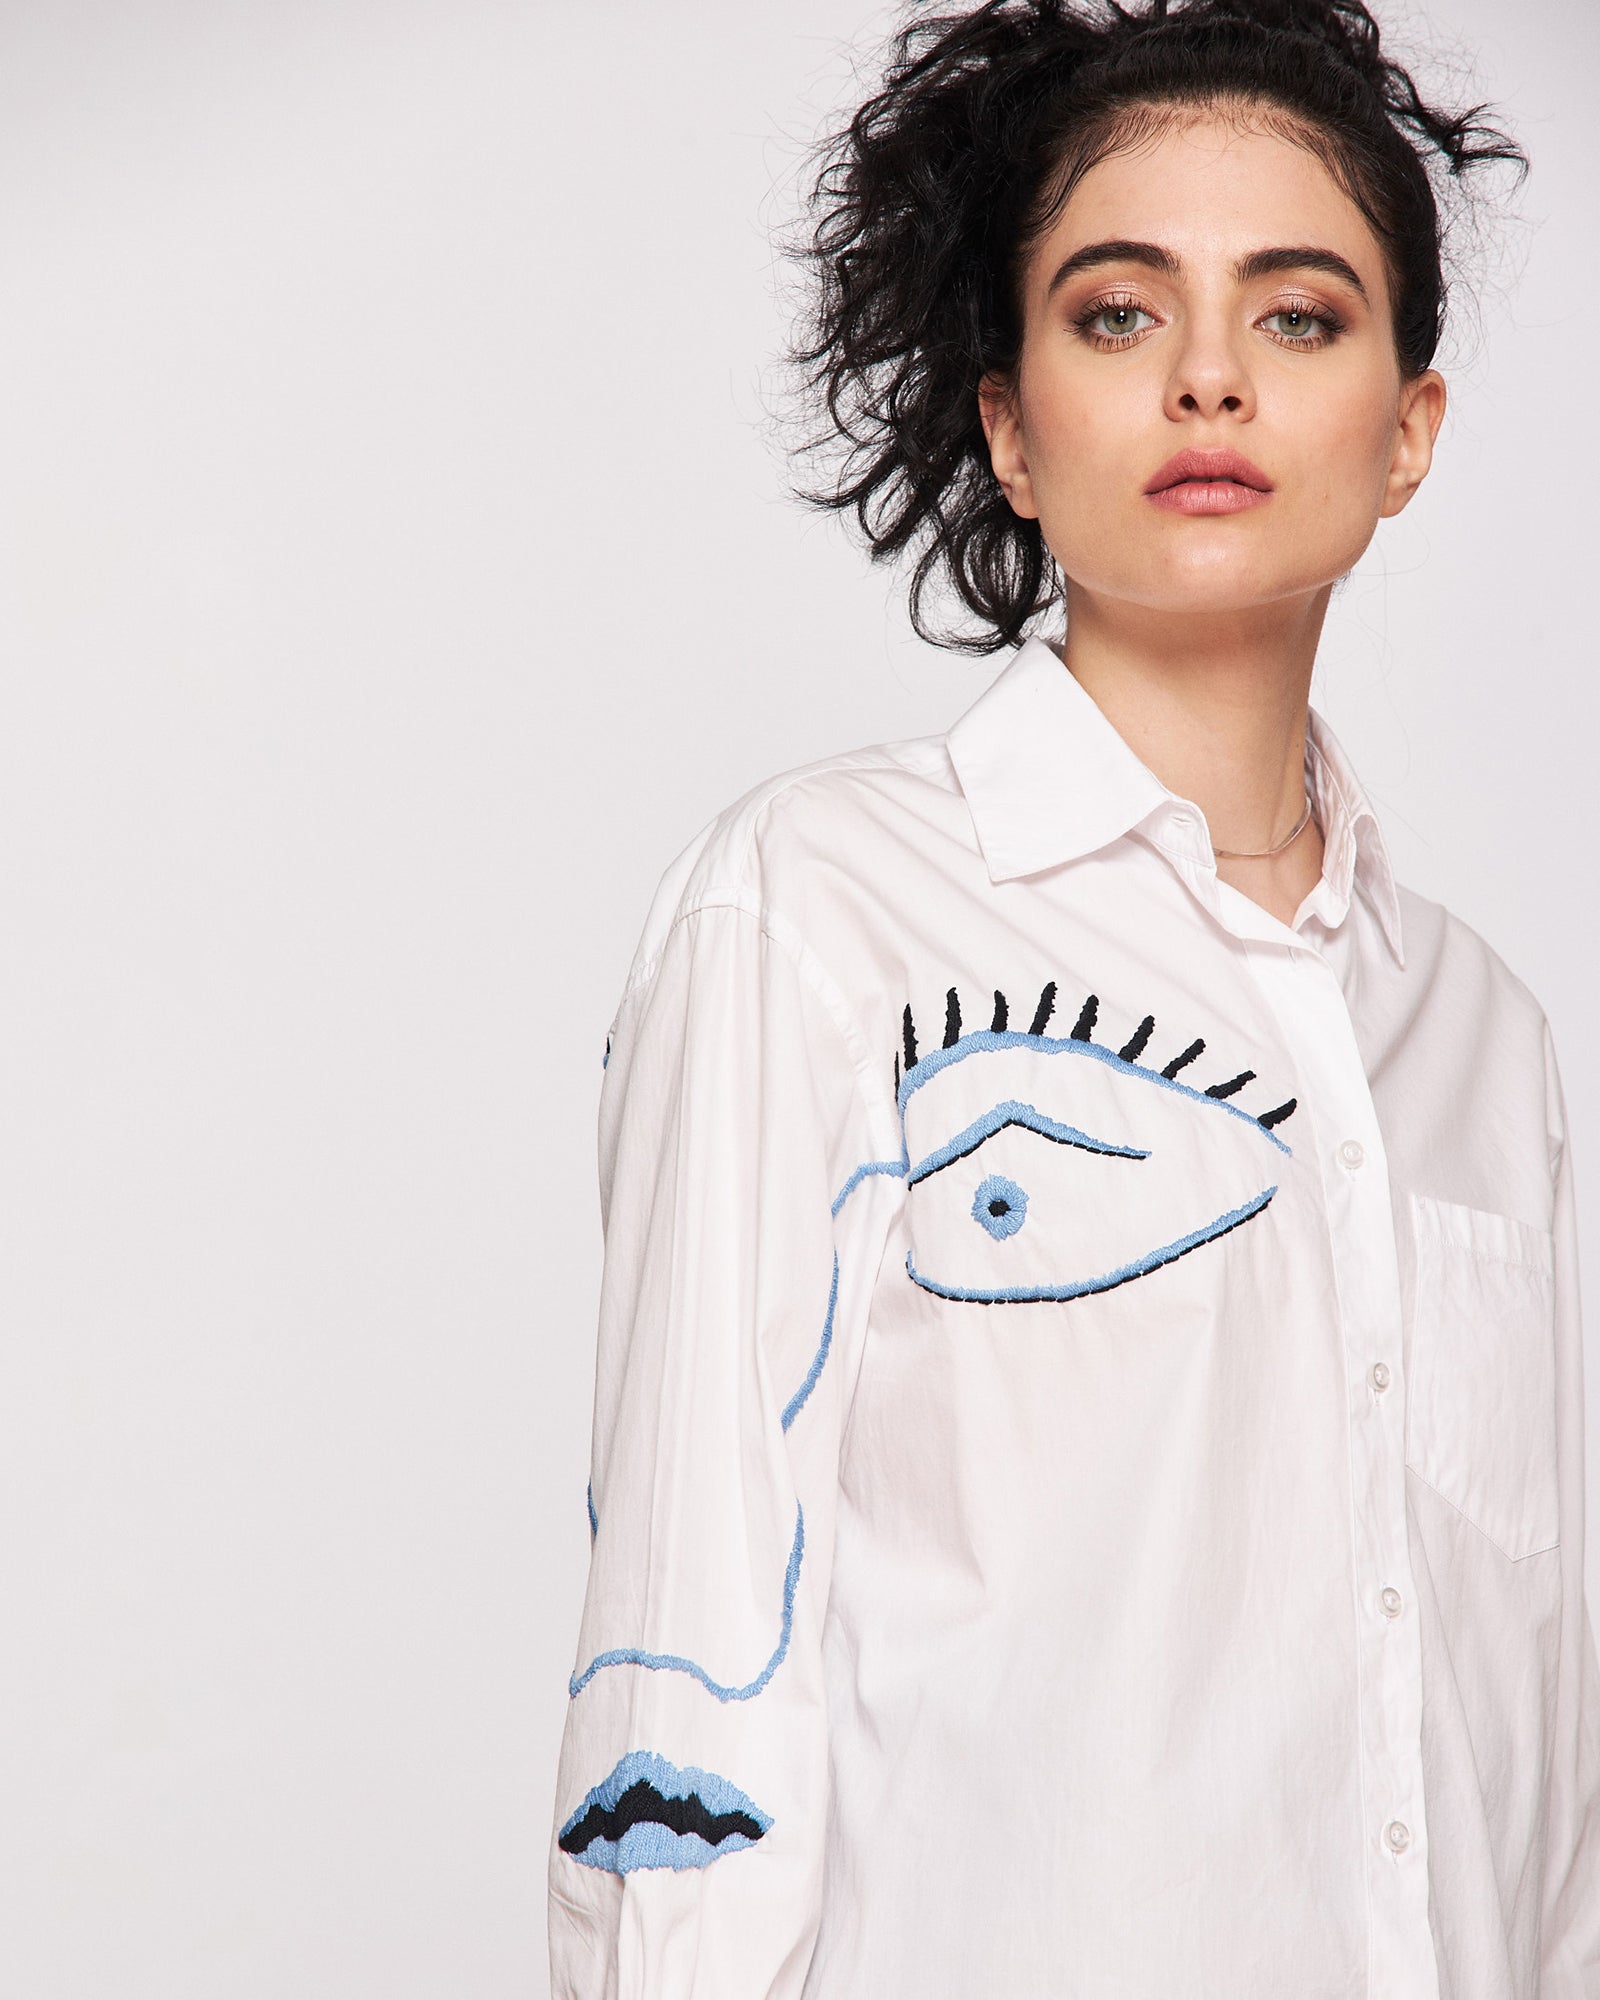 Women's hand-embroidered shirt "I see you"